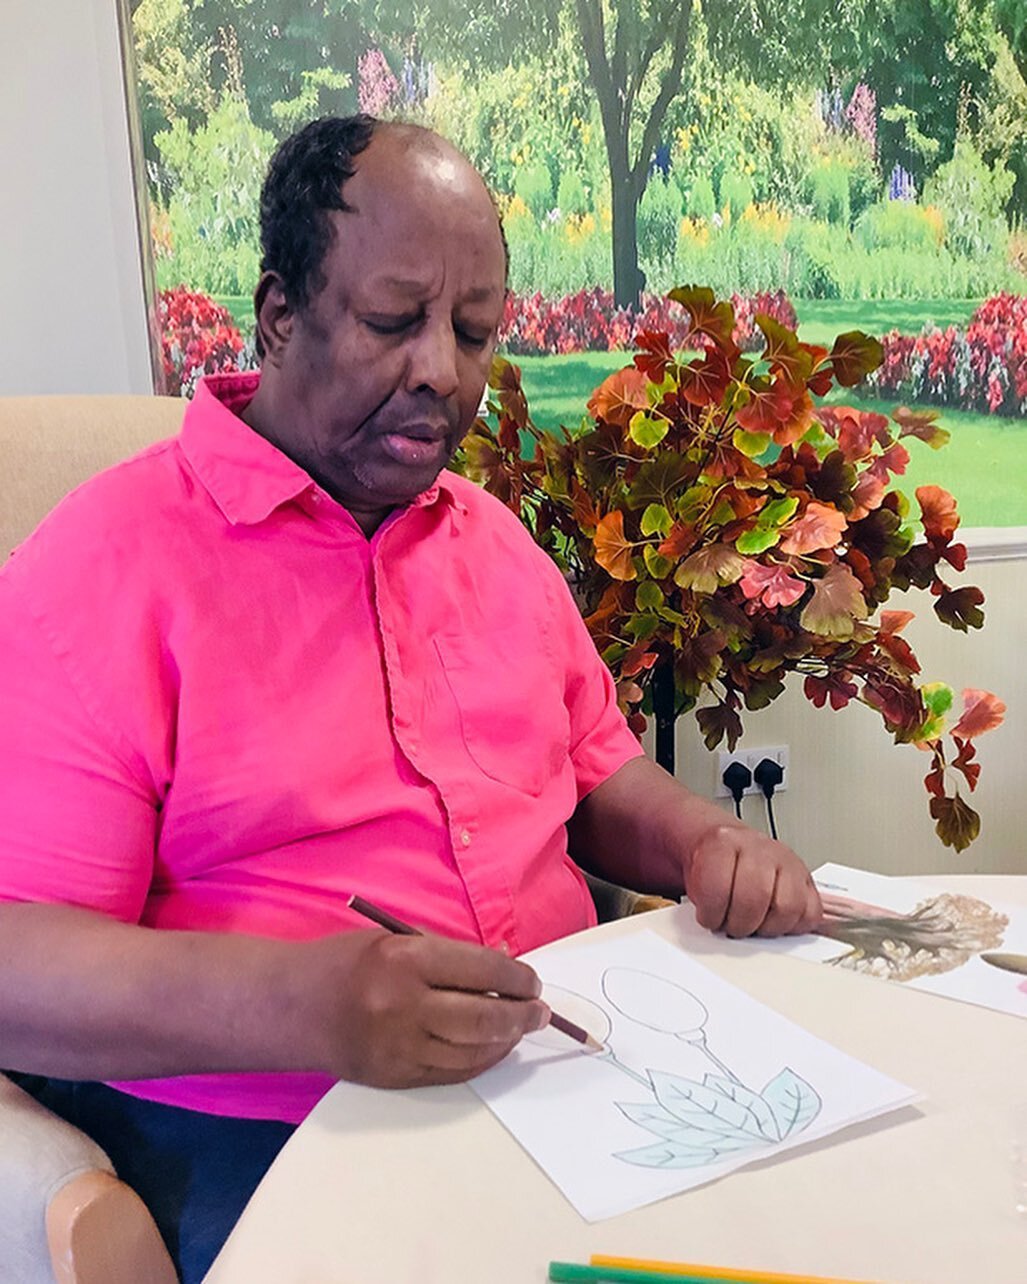 We so enjoy seeing how the participants response to the Culture Box activities! Here is one of the activities designed to be used in conjunction with the beautiful Baobab tree painted by artist Martin Jordan!
.
#cultureboxstudy #dementia #carehomeact